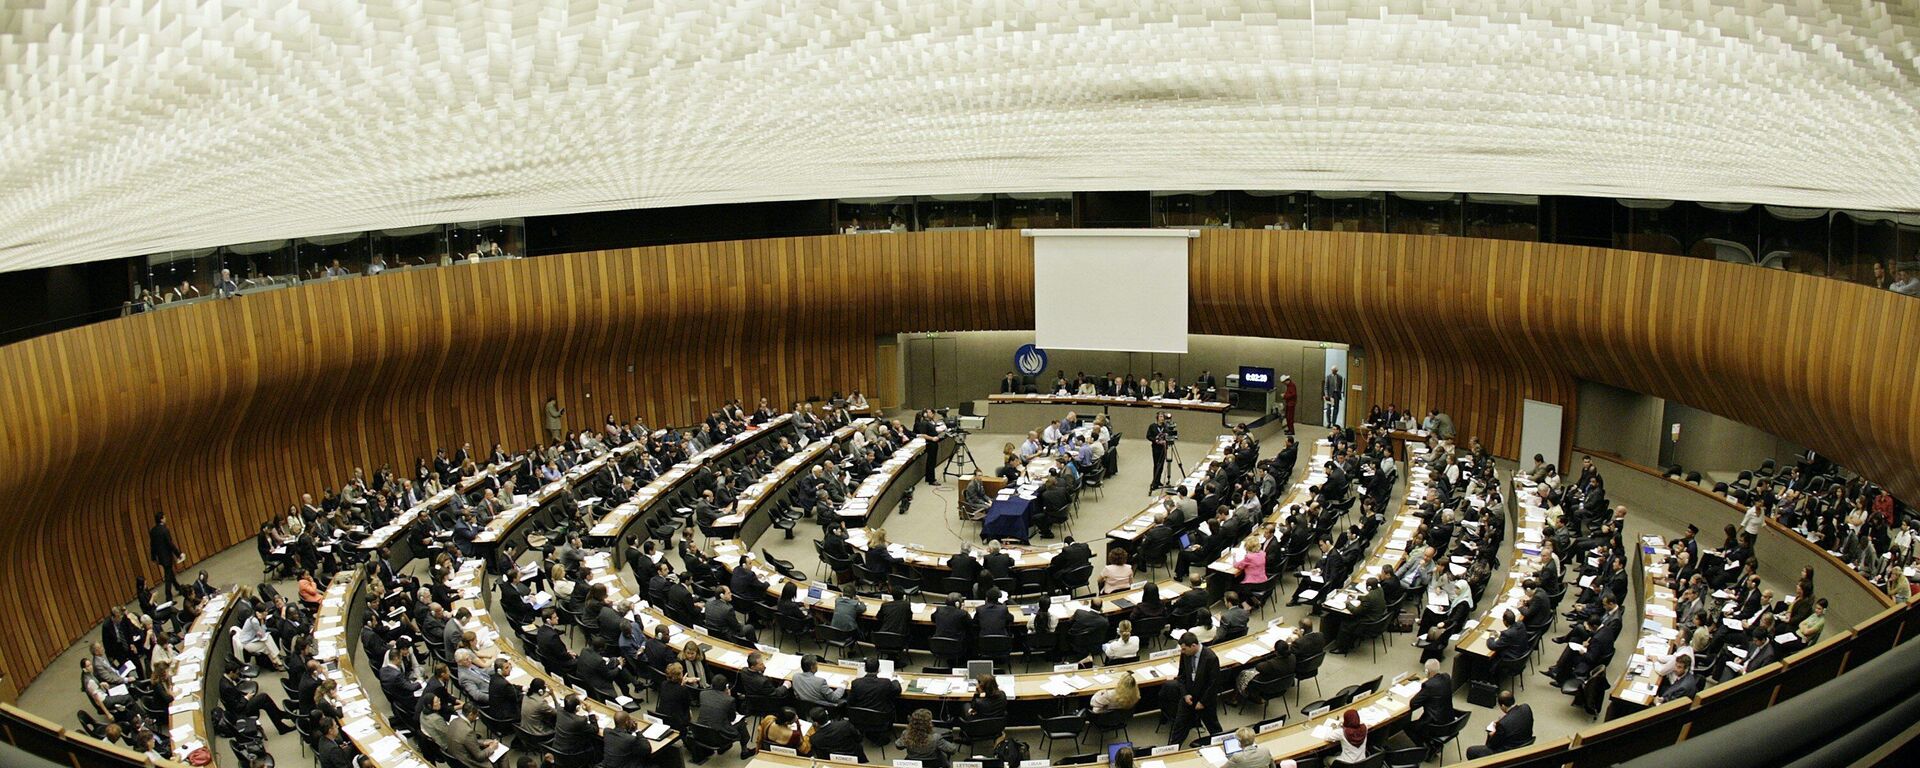 A general view of the assembly hall during the 6th United Nations Human Rights Council at the European headquarters of the U.N. in Geneva, Switzerland, Monday, Sept. 10, 2007. The Human Rights Council opened a three-week session Monday. - Sputnik भारत, 1920, 13.12.2023